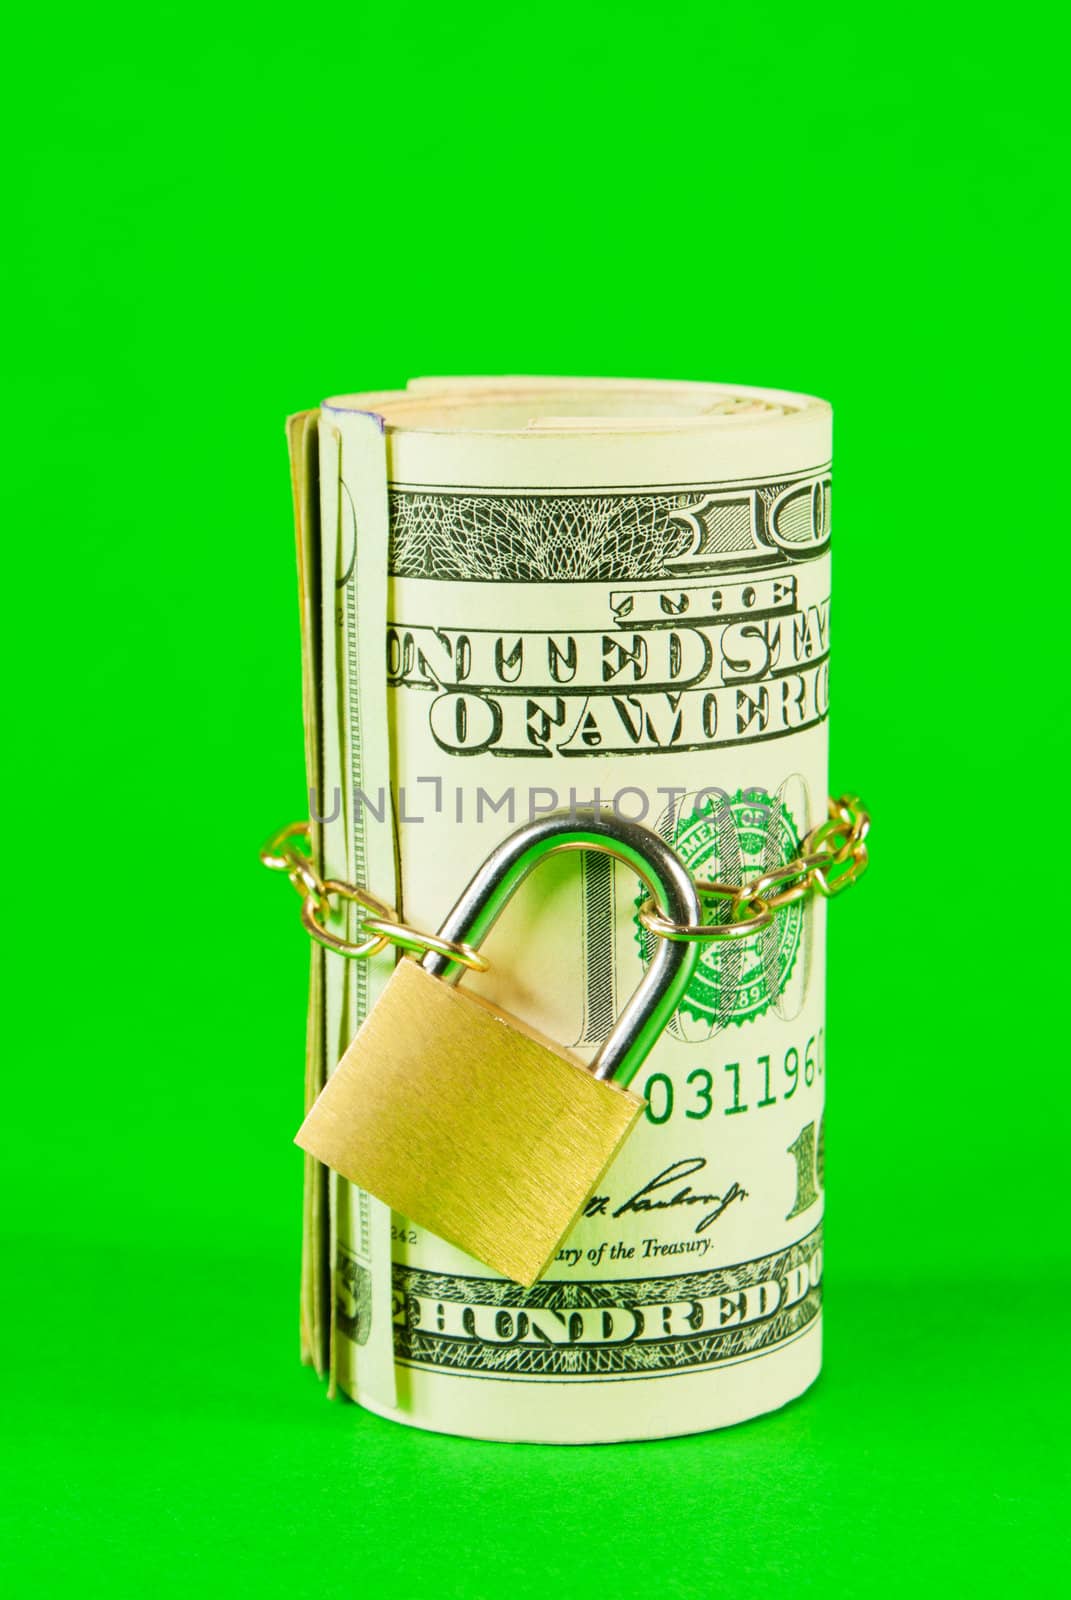 Roll of US dollars chained and locked over green background